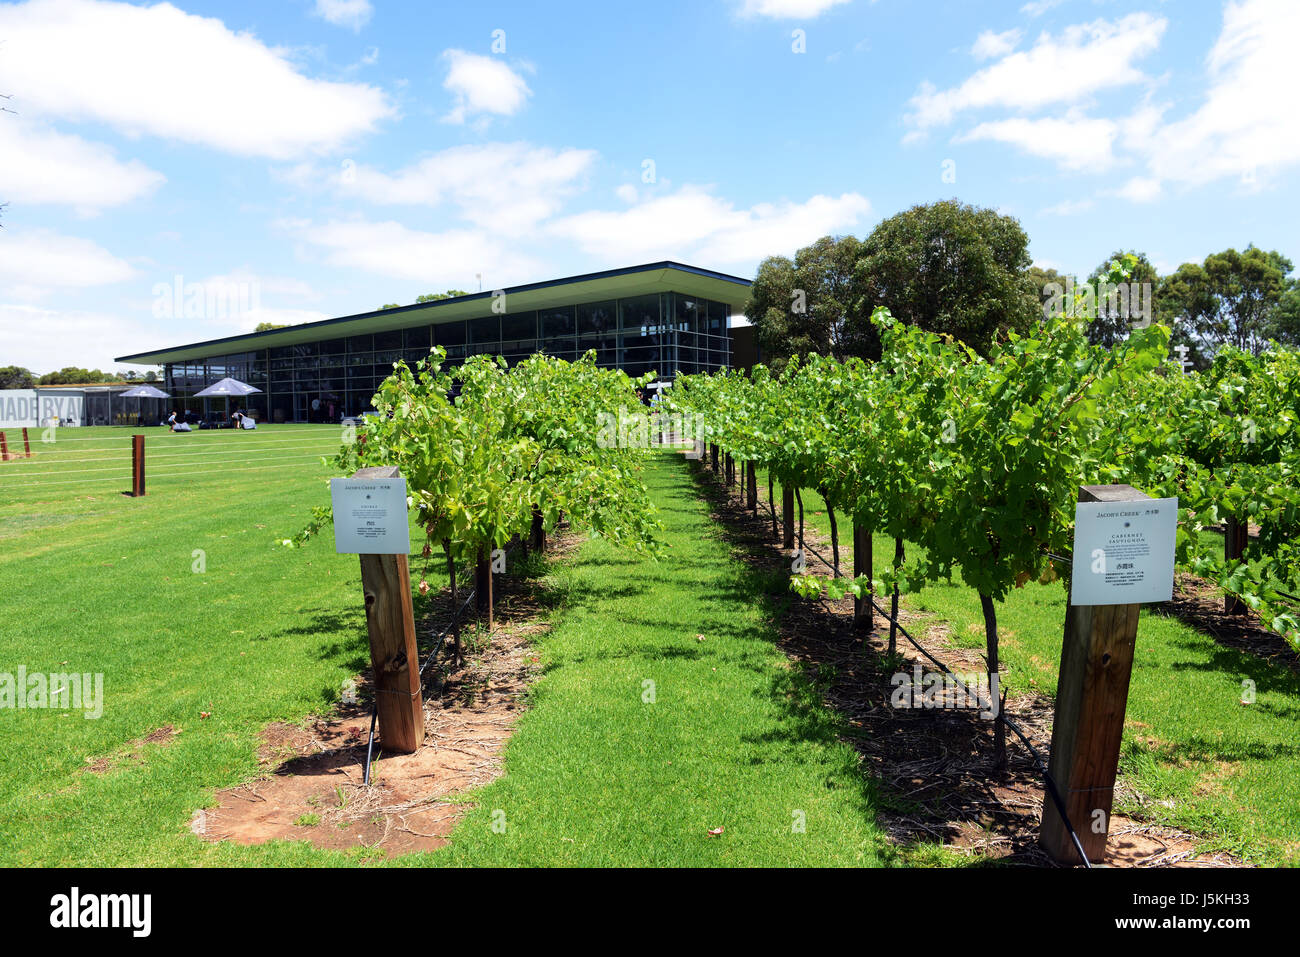 Vinyard trial plots at the Jacob Creek winery in South Australia. Stock Photo